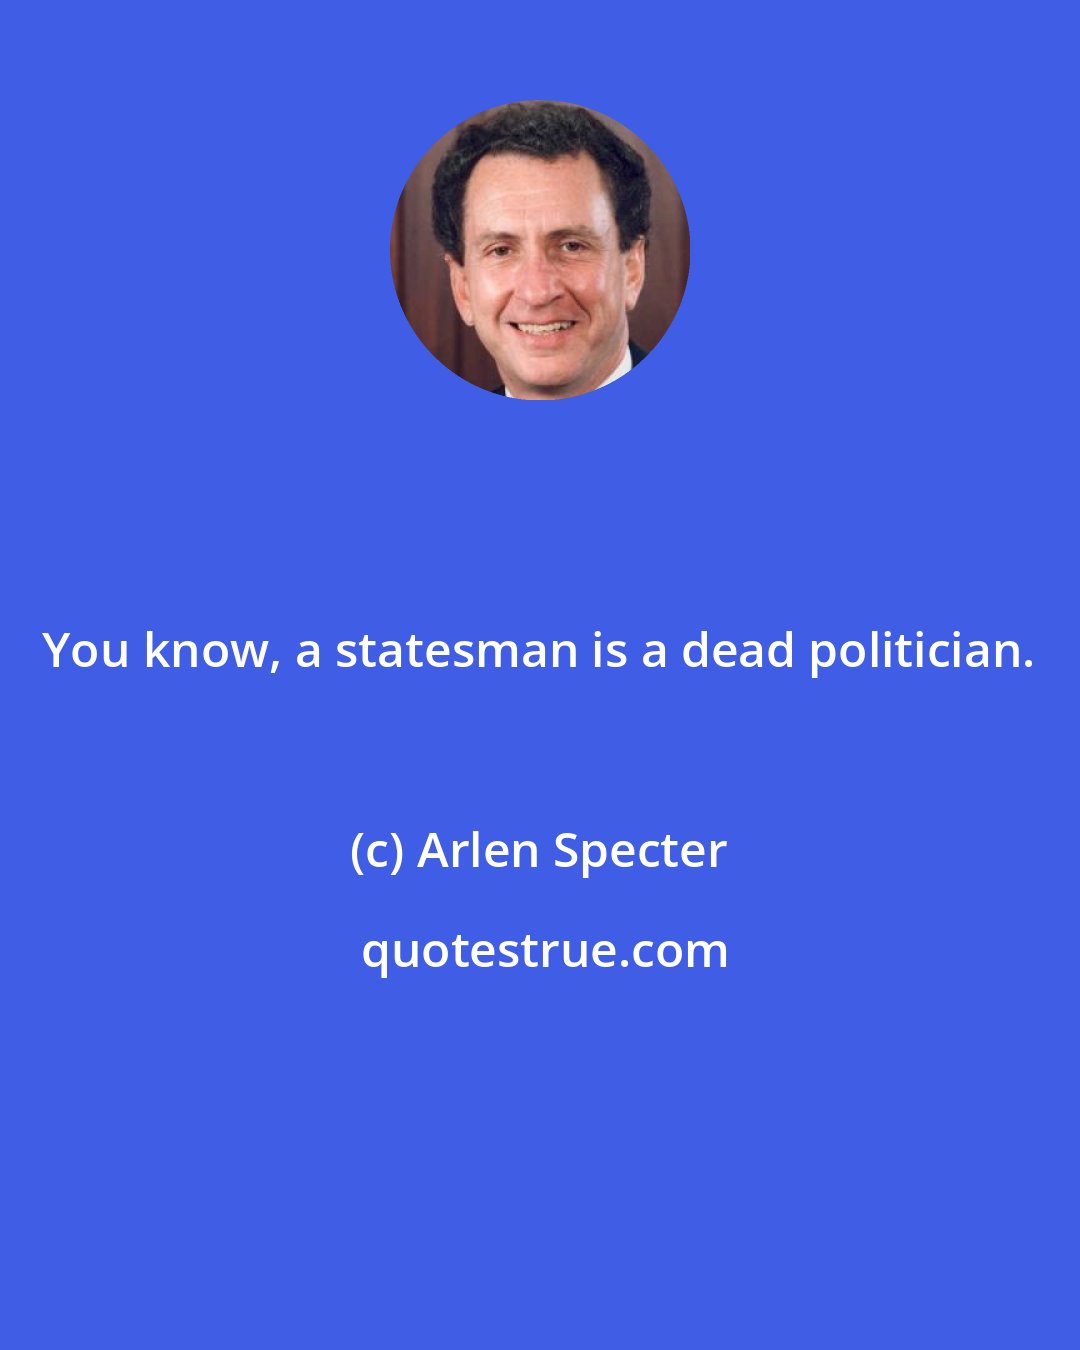 Arlen Specter: You know, a statesman is a dead politician.